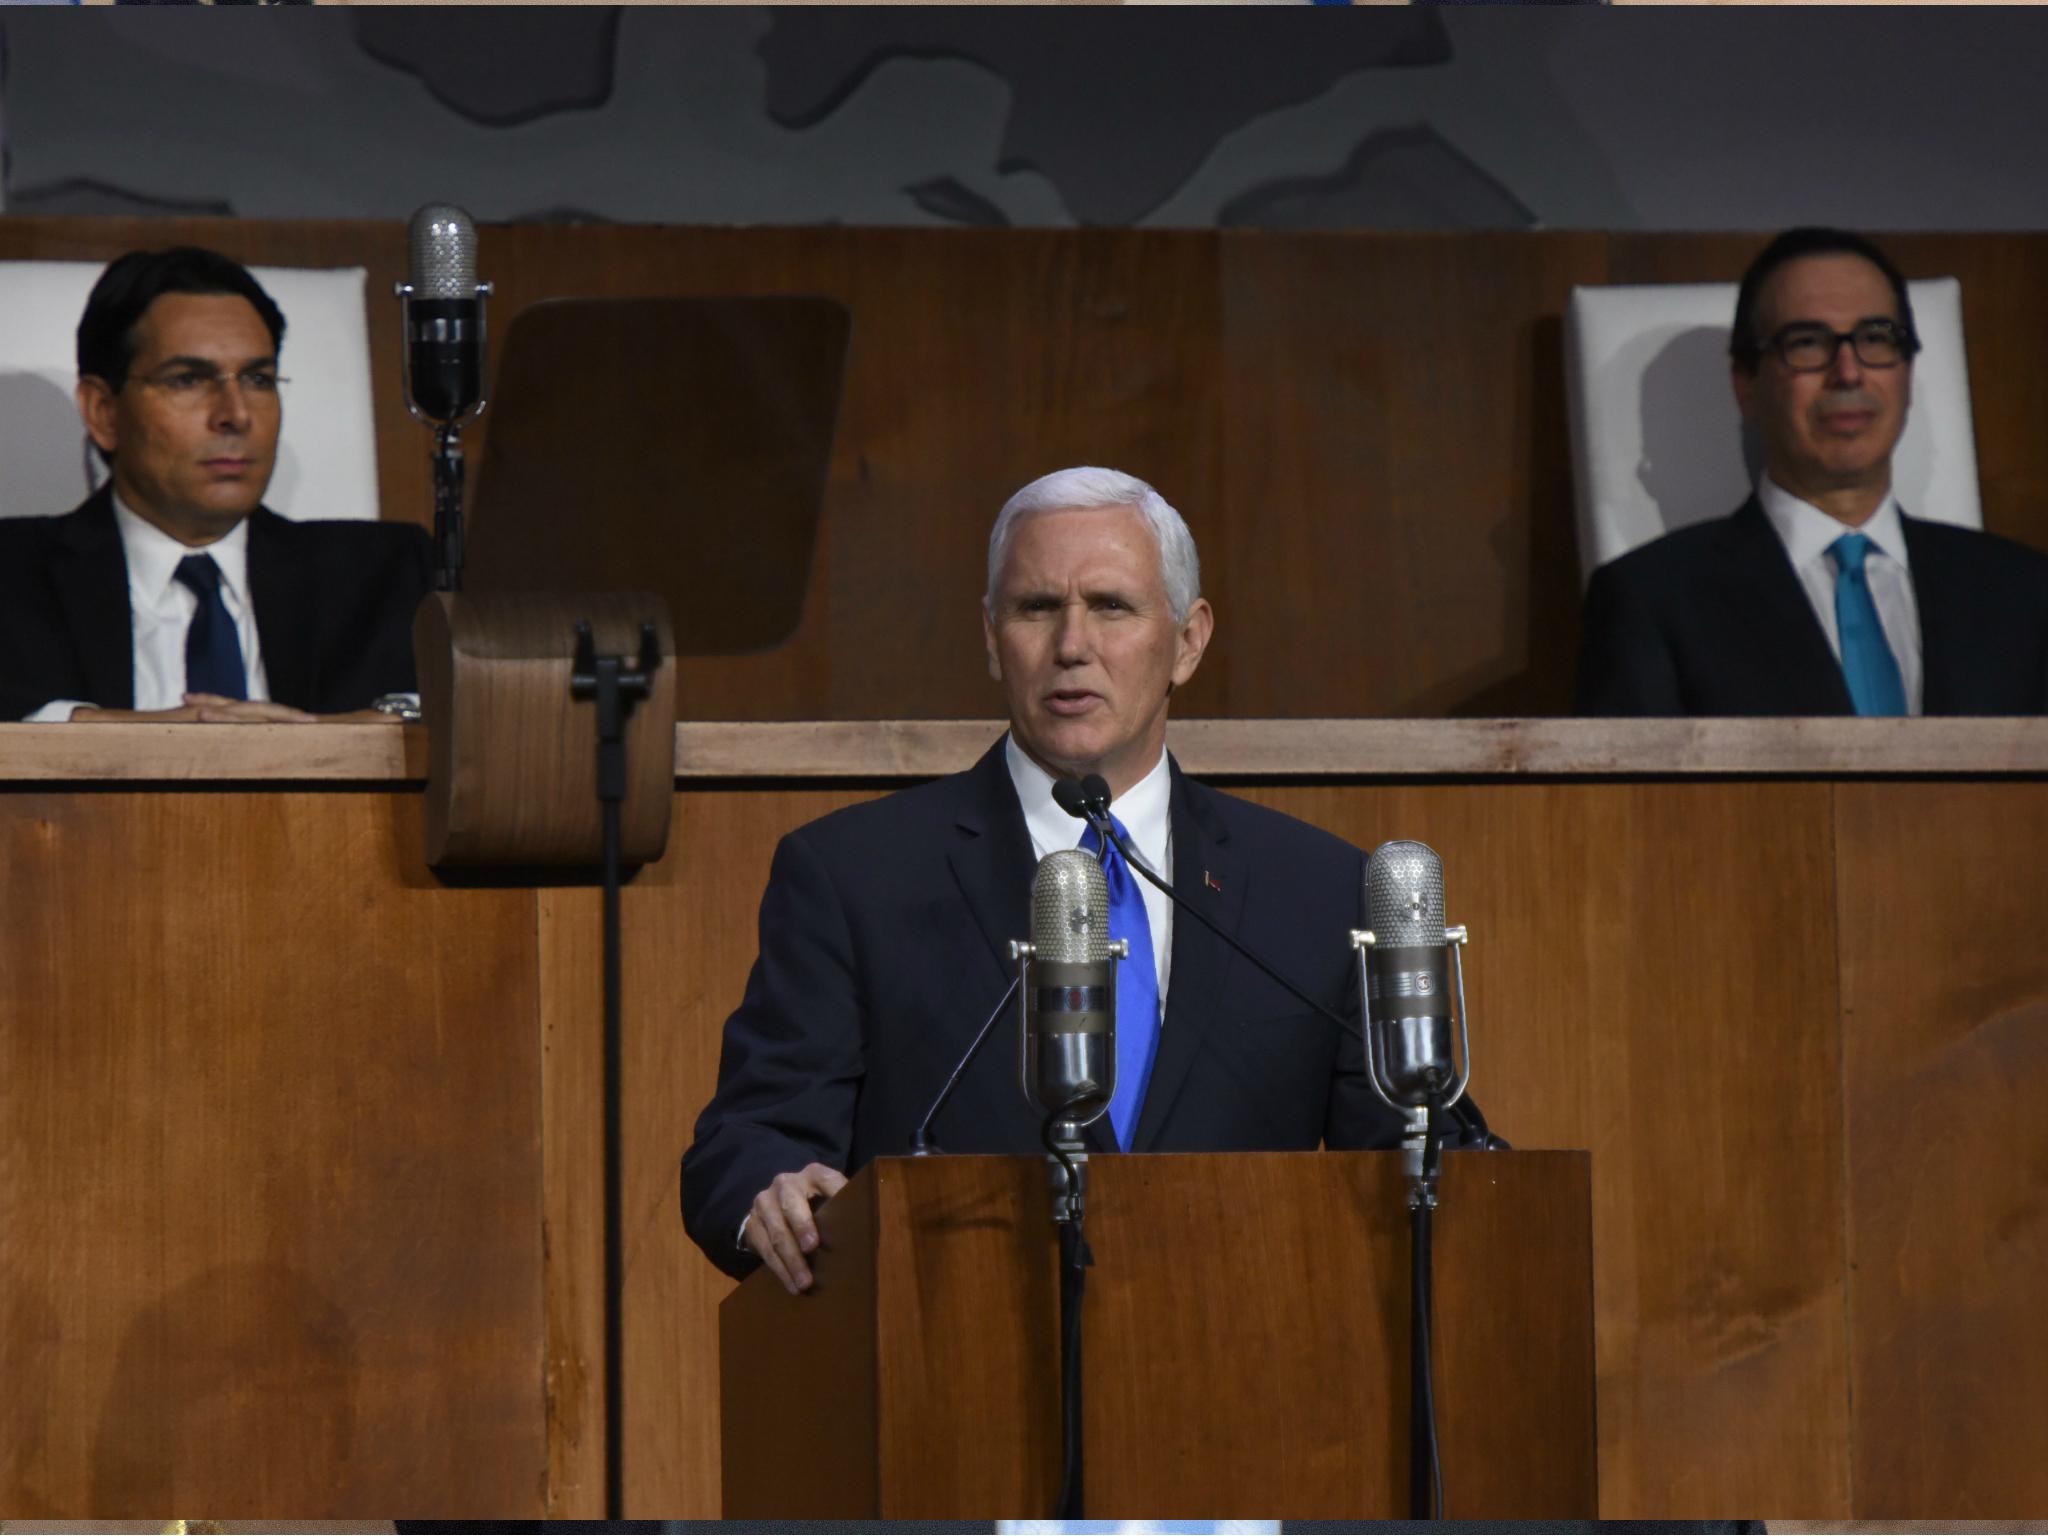 US Vice President Mike Pence speaks at the Permanent Mission of Israel to the United Nations on 28 November 2017